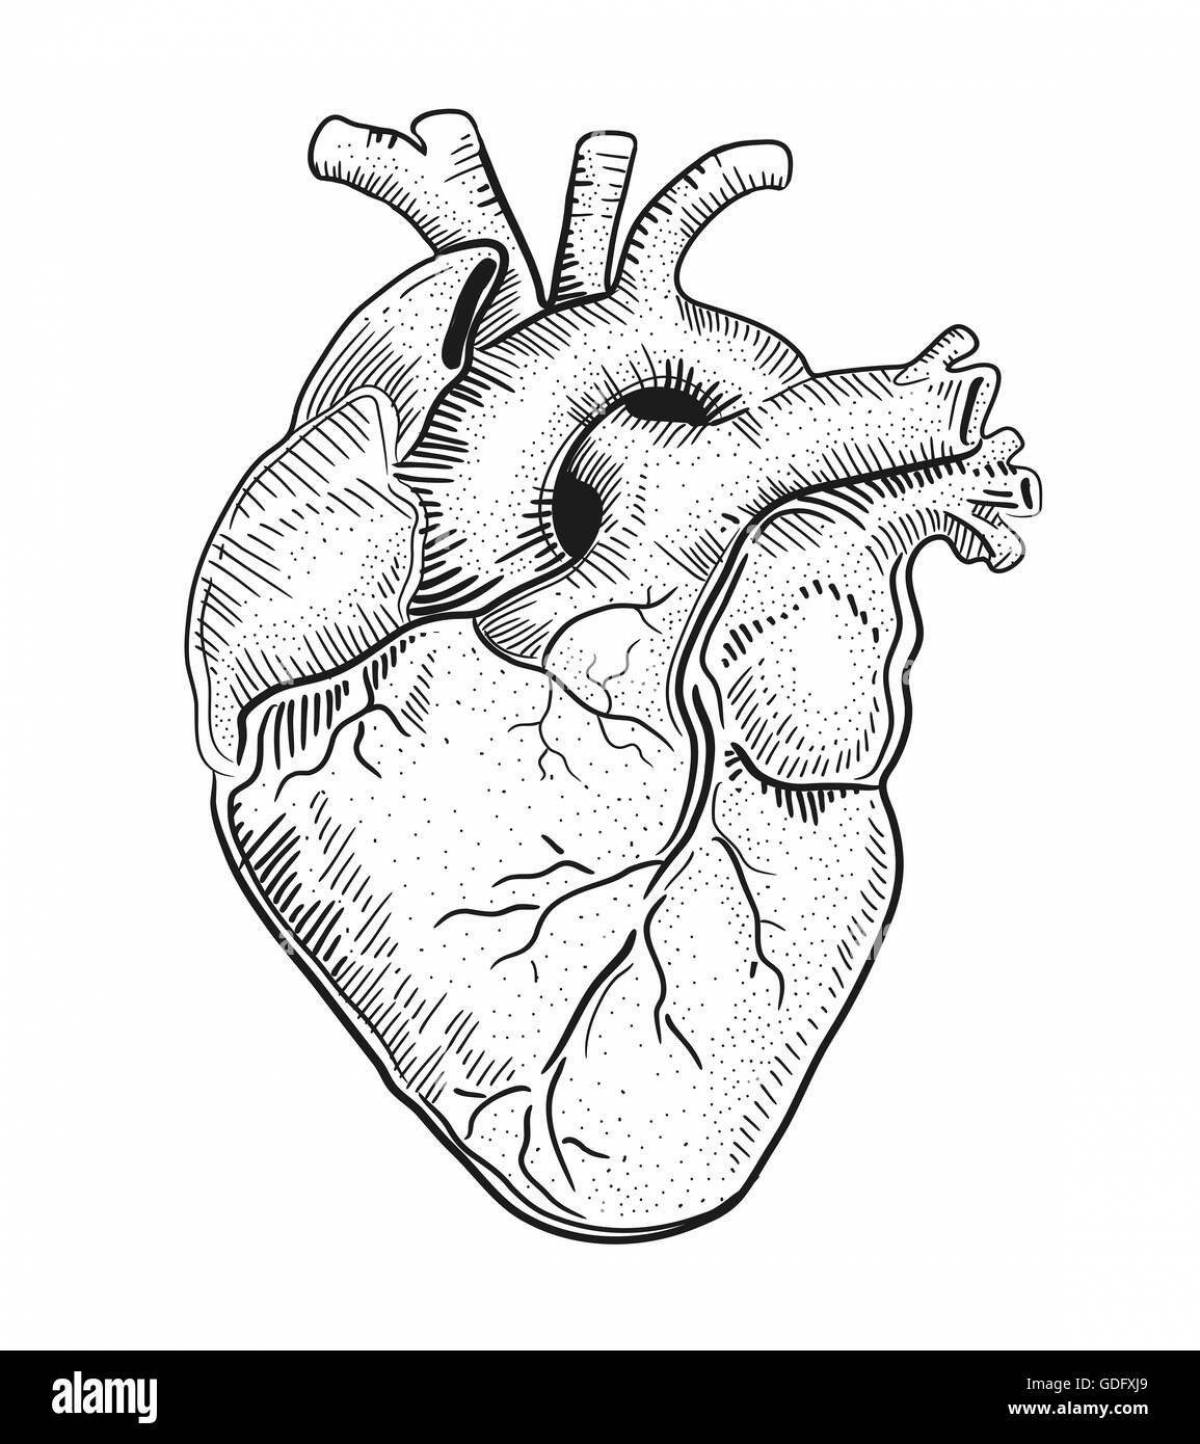 Cute human heart coloring page